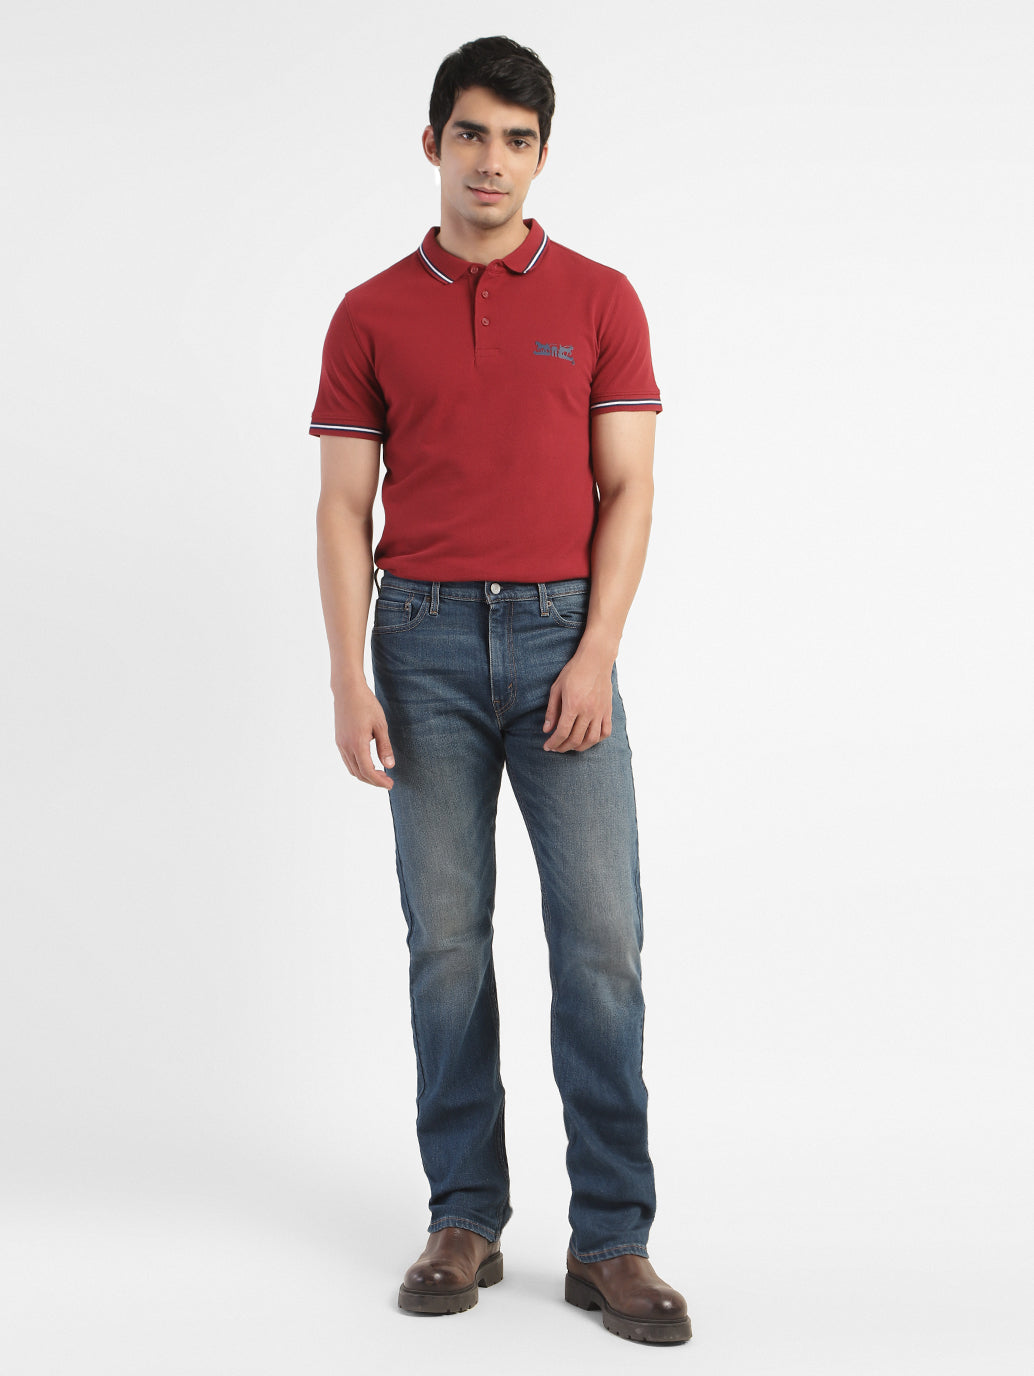 Men's Solid Polo T-shirt Red